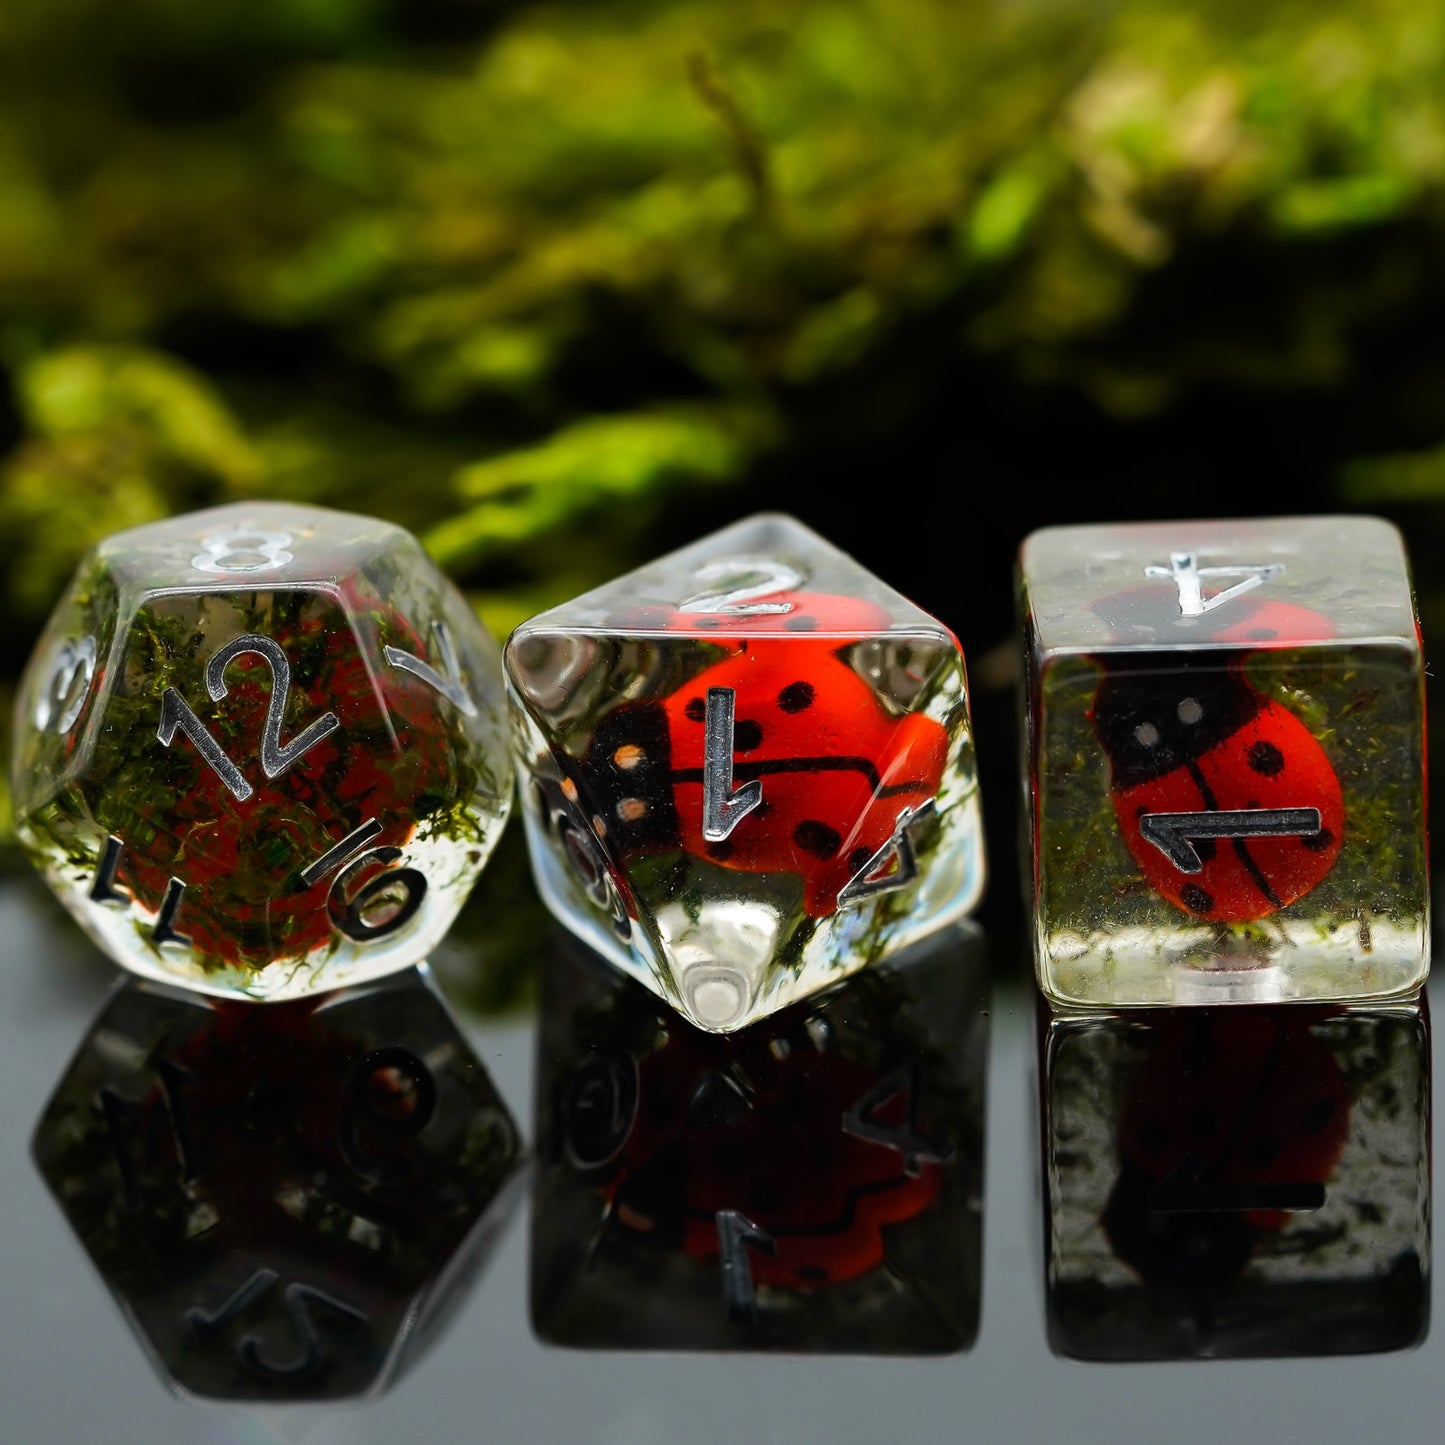 d12, d8 and d6 clear resin ladybug dice on black reflective surface with forest in background